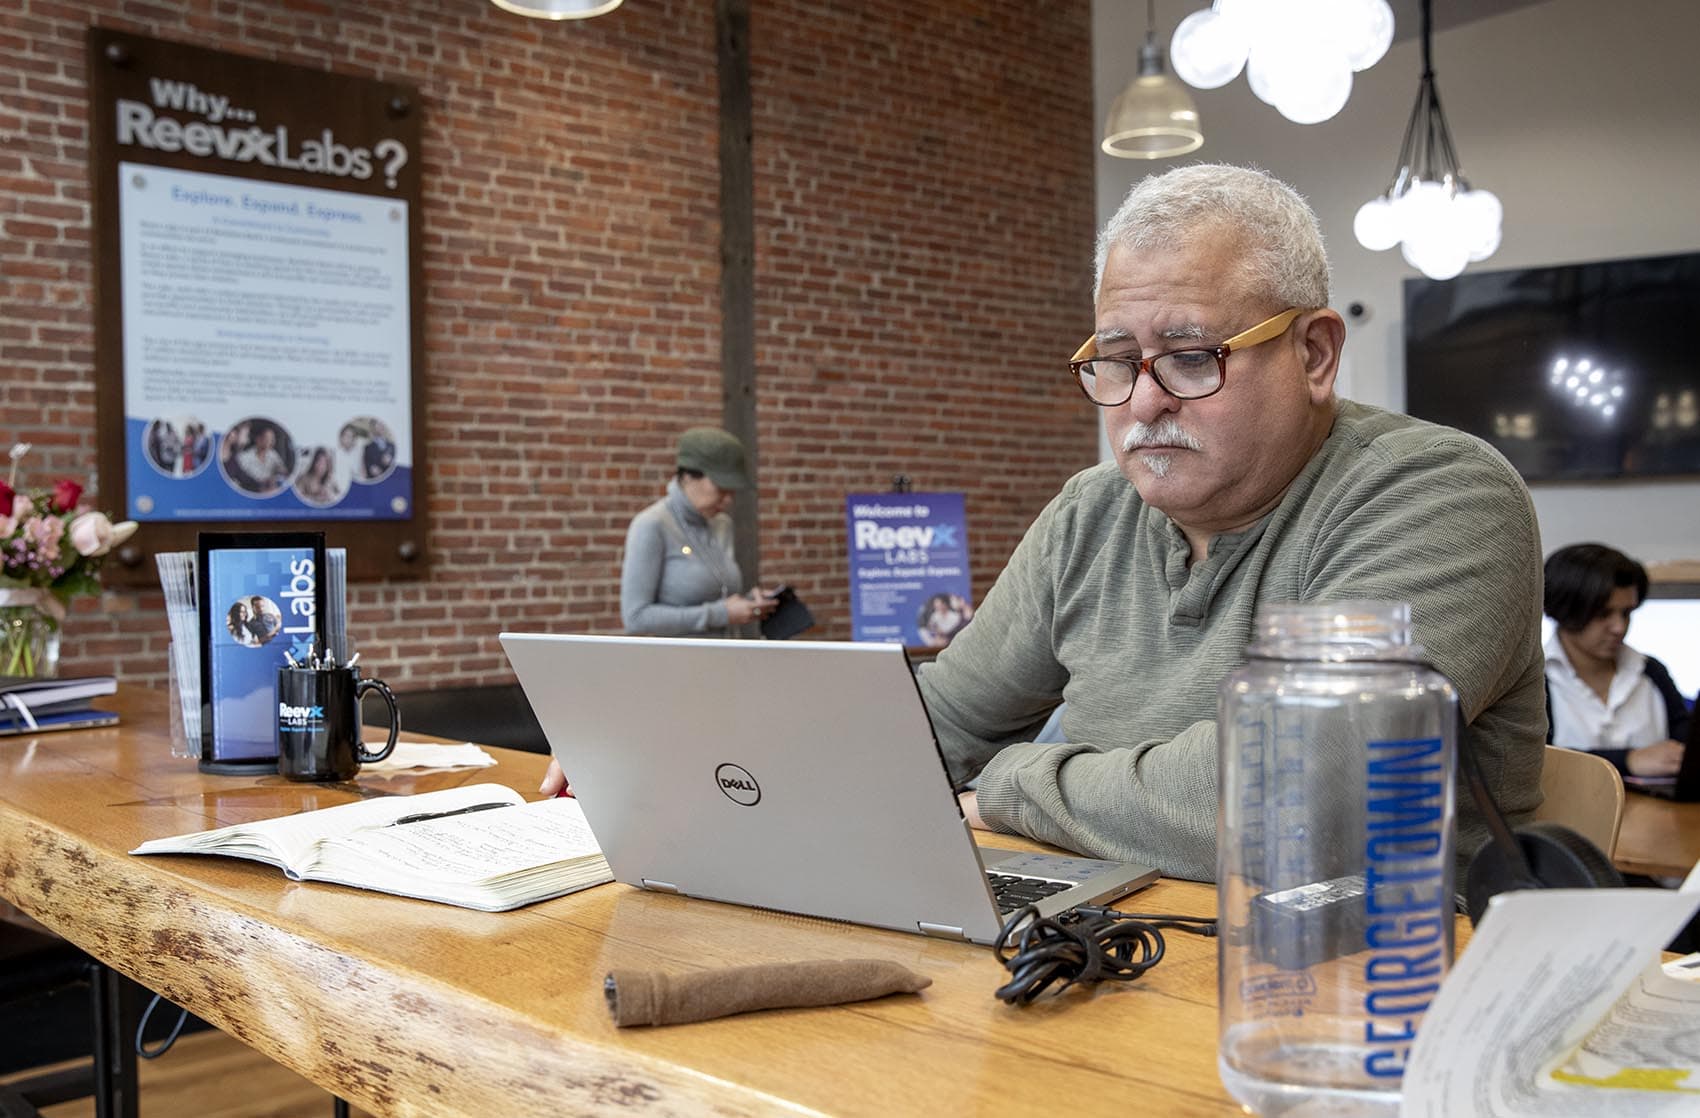 Sitting by the window at Reevx, Wayne Ysaguirre works on plans to launch a new non-profit. He says it's a good place to focus and get work done. (Robin Lubbock/WBUR)